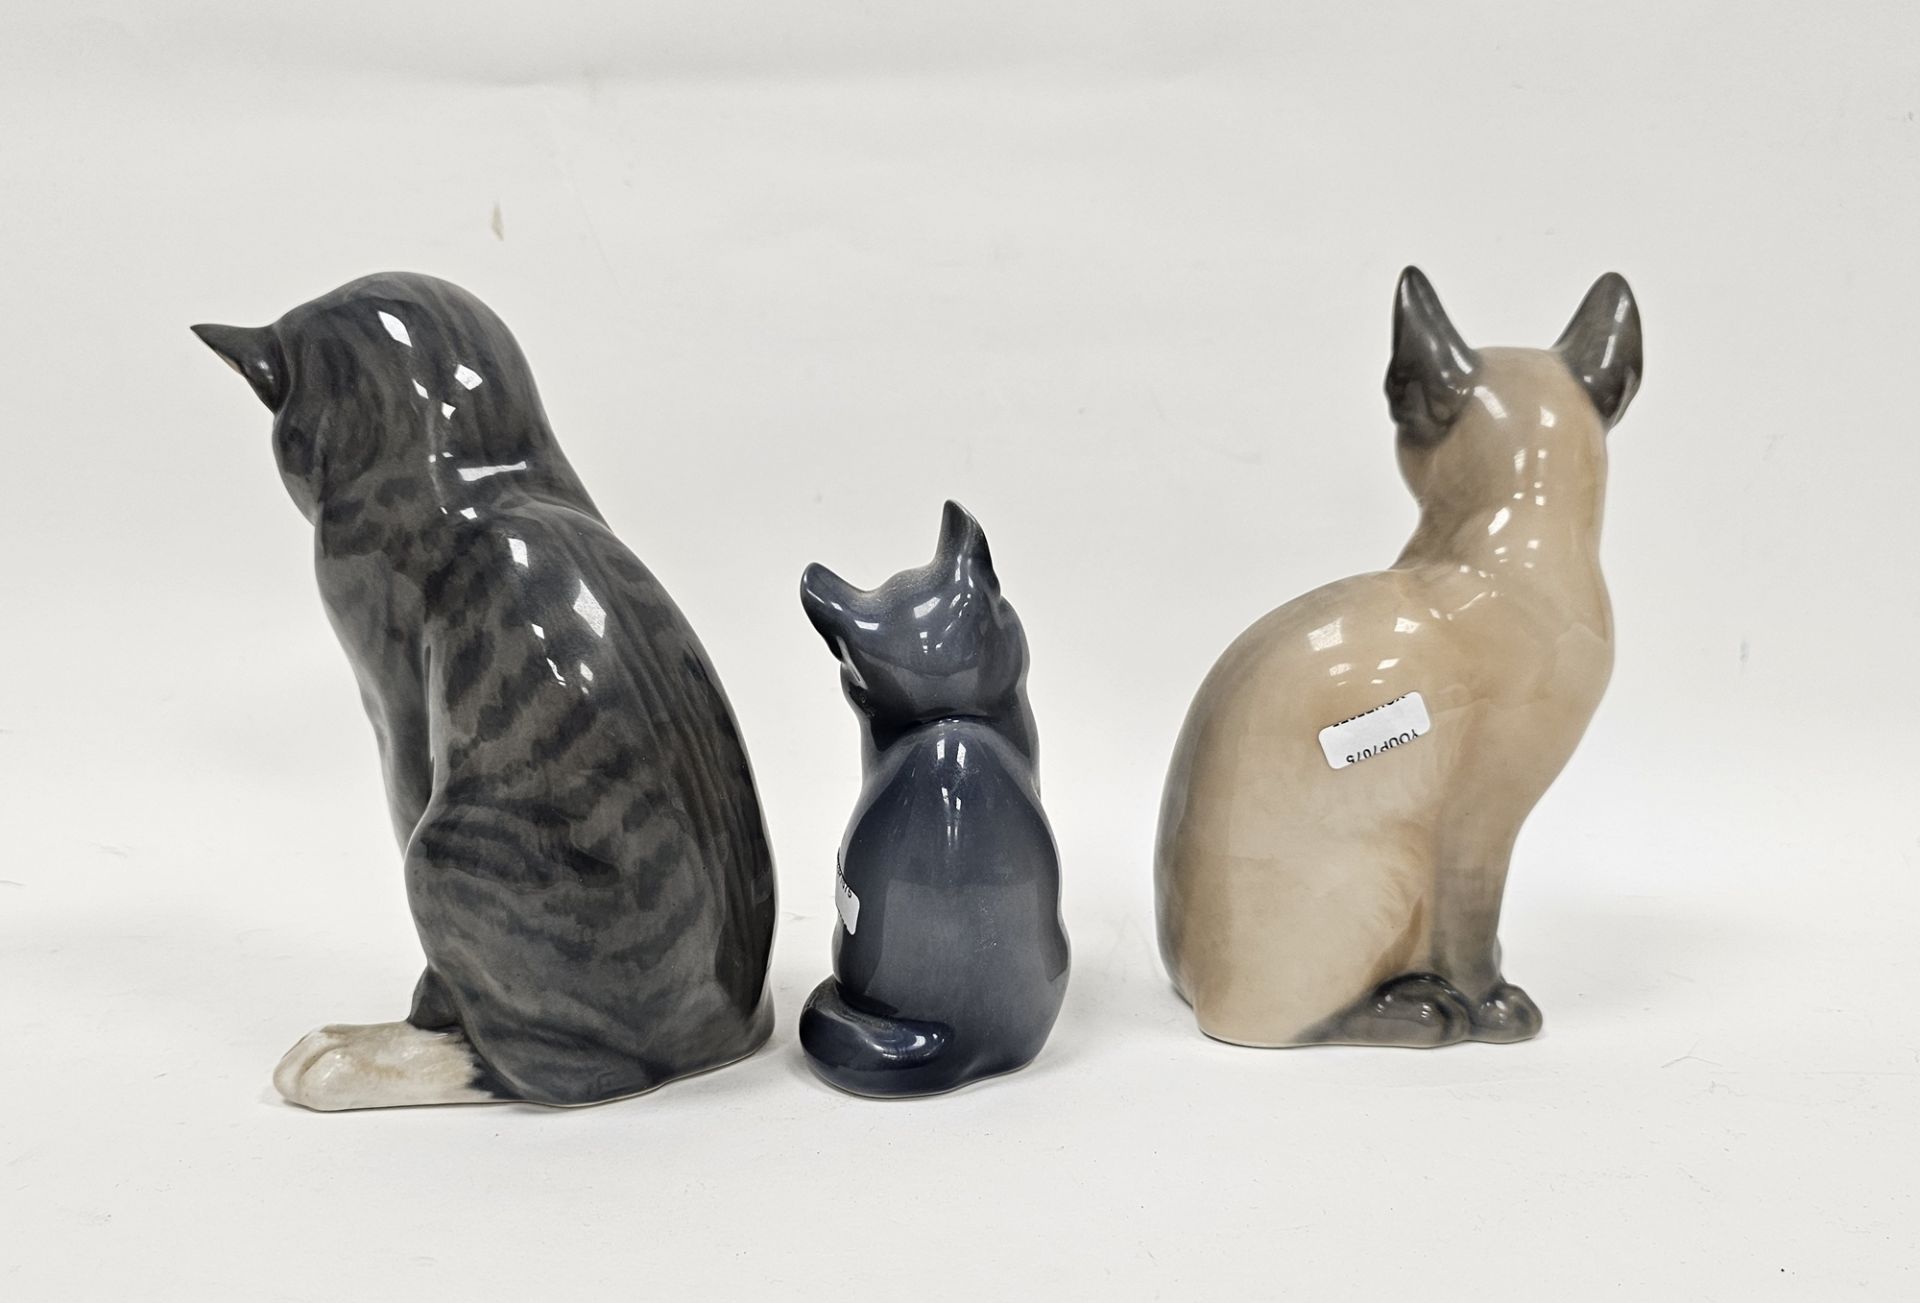 Three Royal Copenhagen porcelain models of cats, each modelled seated, one modelled as a Siamese, - Image 2 of 5